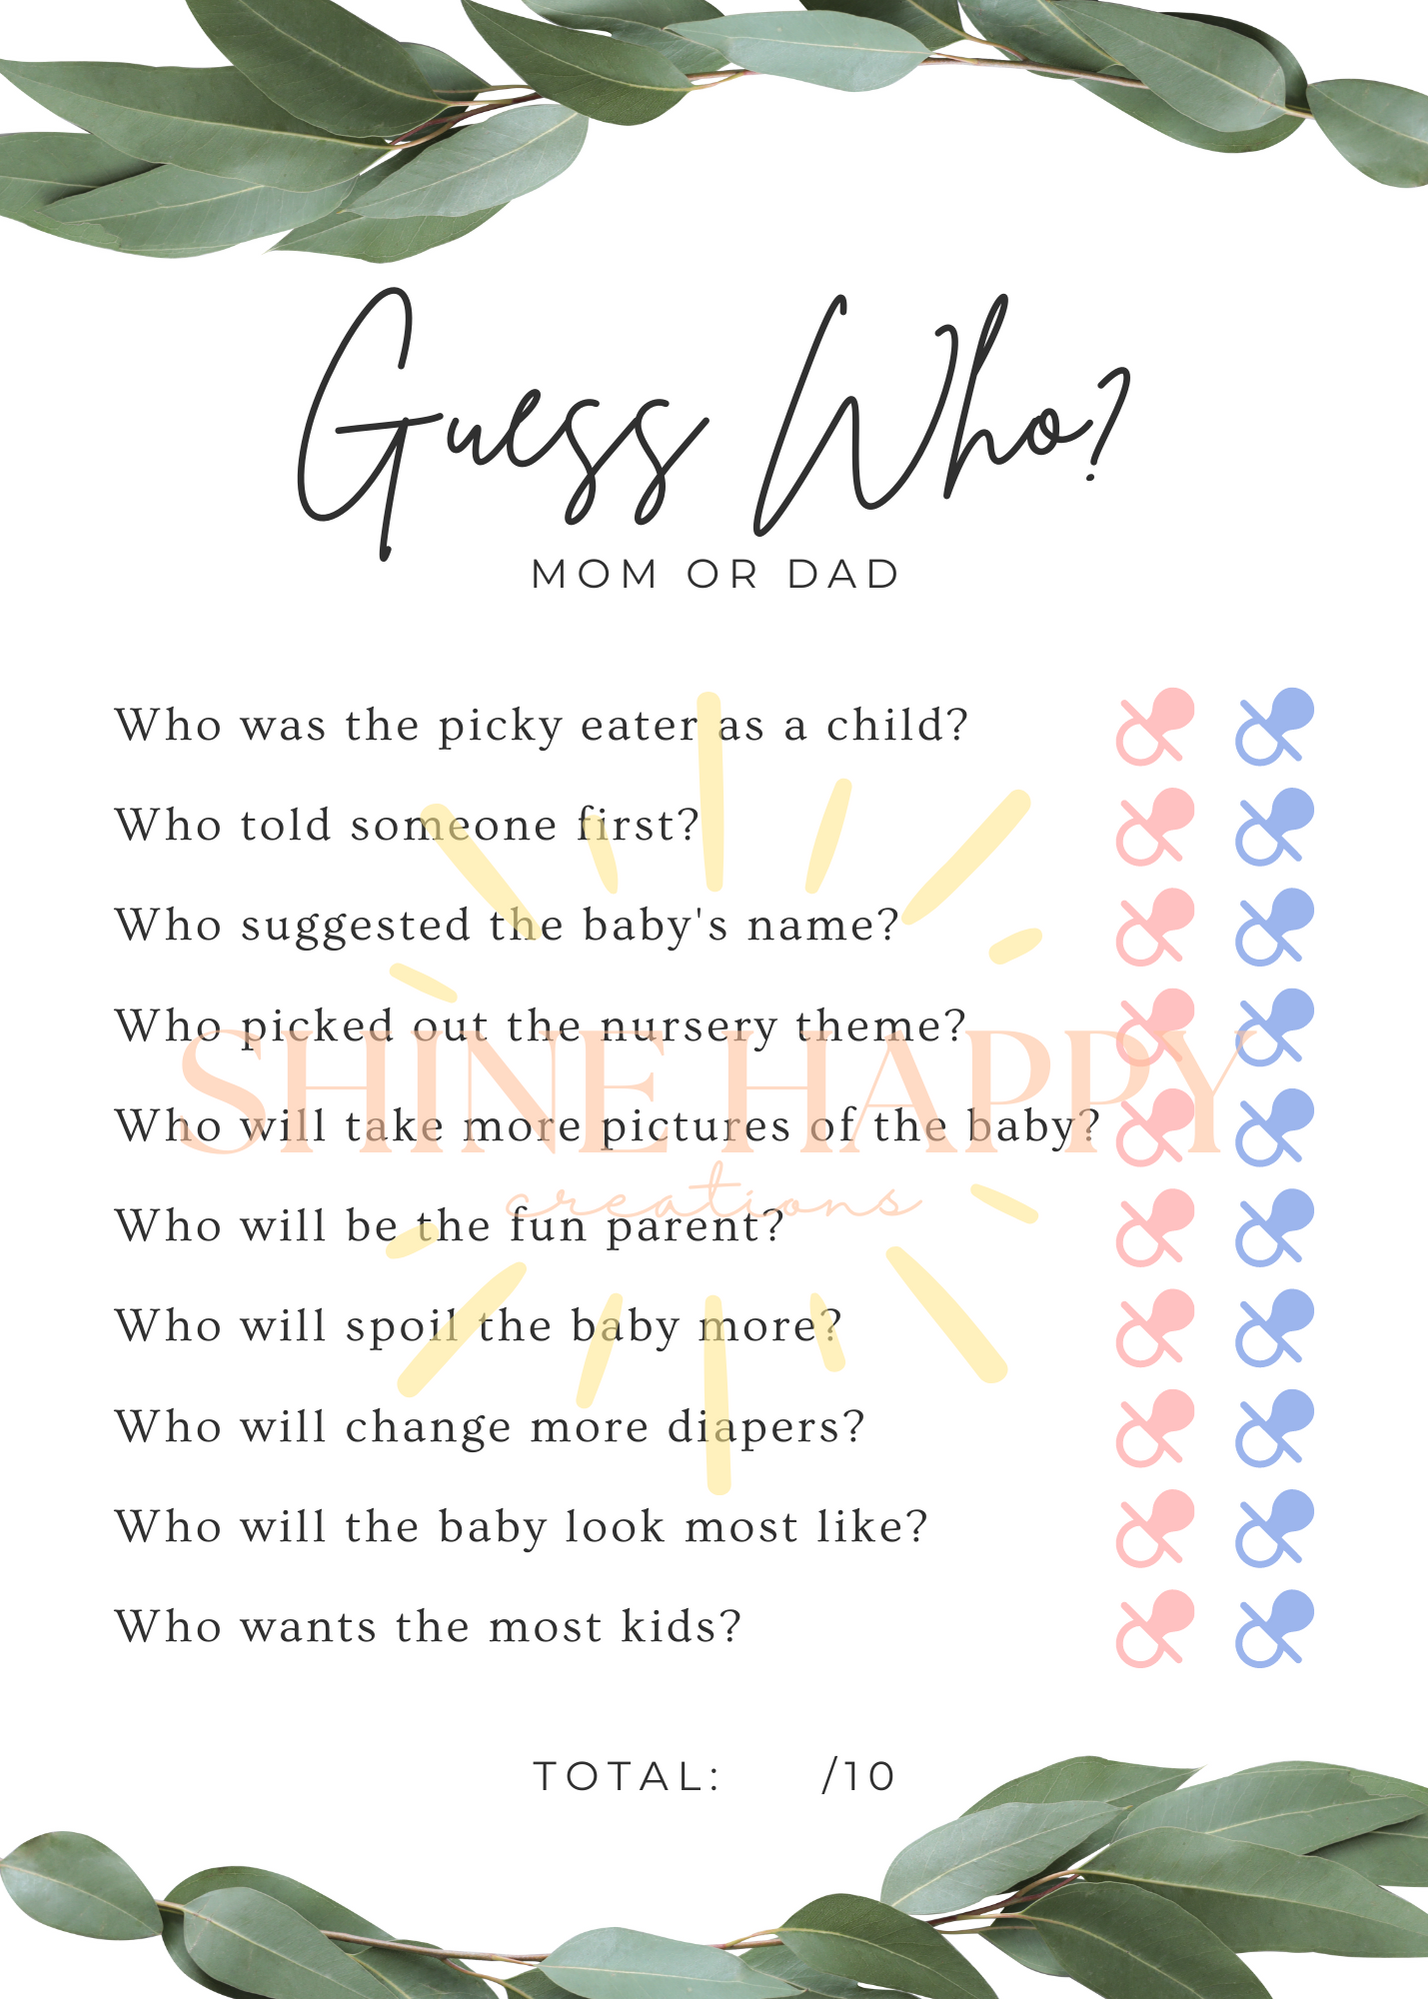 Baby Shower Guest Activity - Guess Who Mom vs Dad - Simplistic with Greenery - DOWNLOADABLE (pdf) PRINTABLE